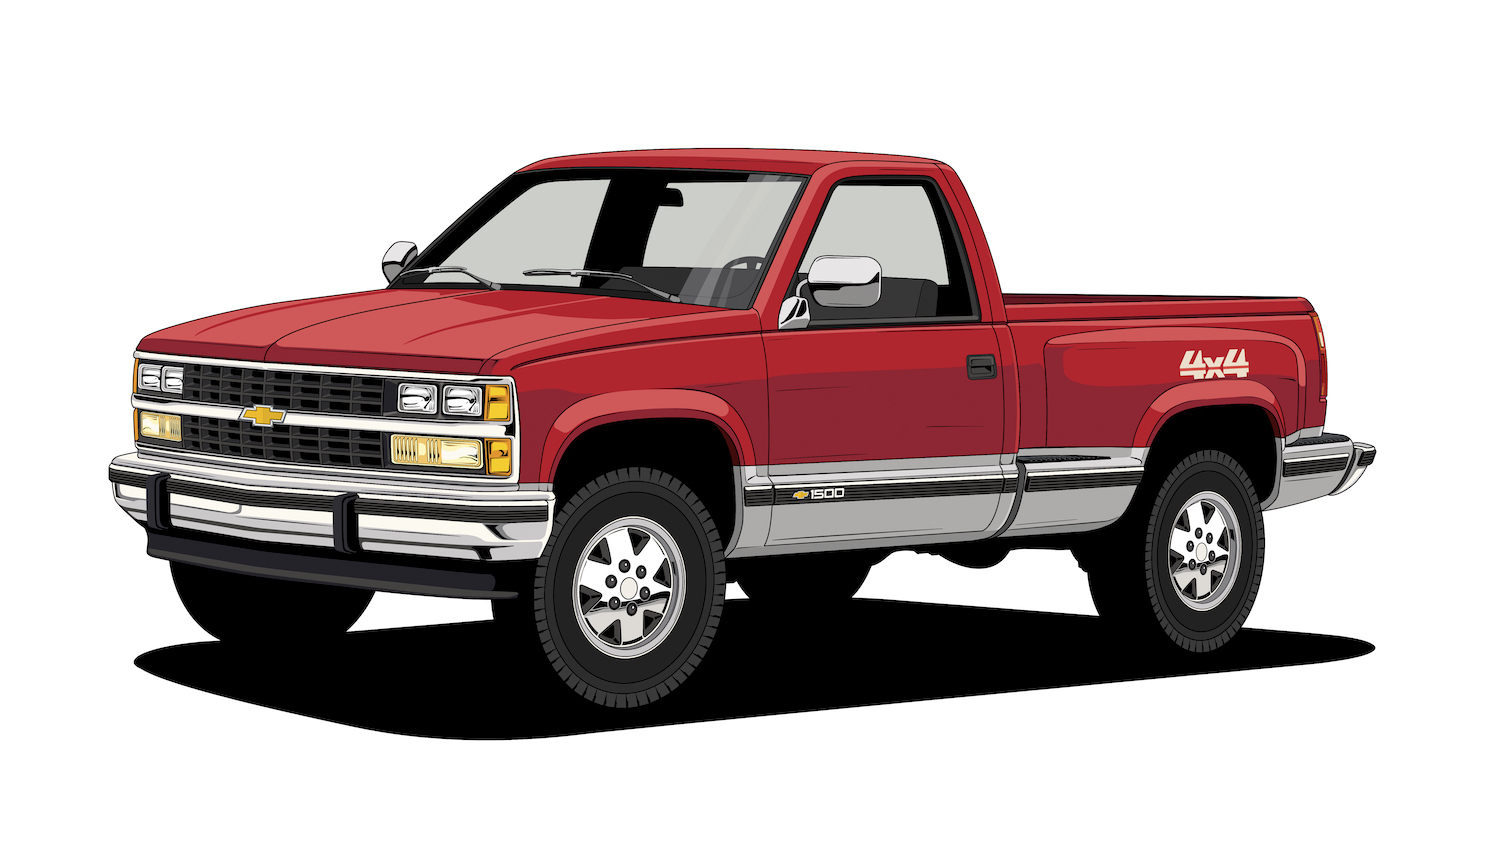 Drawing of a red 1988 Chevrolet K1500 half-ton 4x4 truck which, often referred to as an OBS Chevy. 